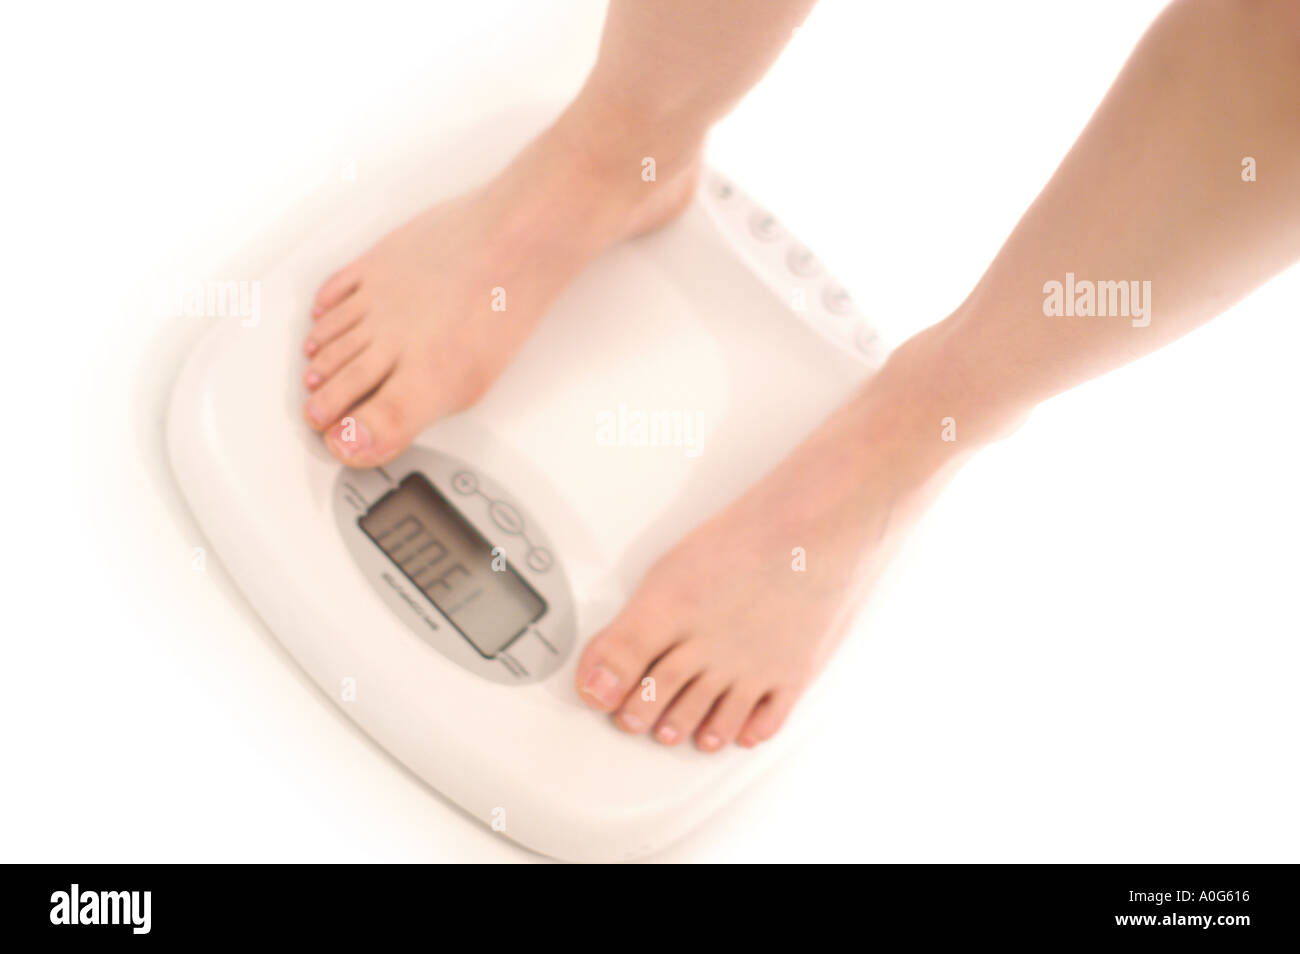 Weight Bathroom Scales bathroom scales Woman Fitness Health female weight scale Stock Photo